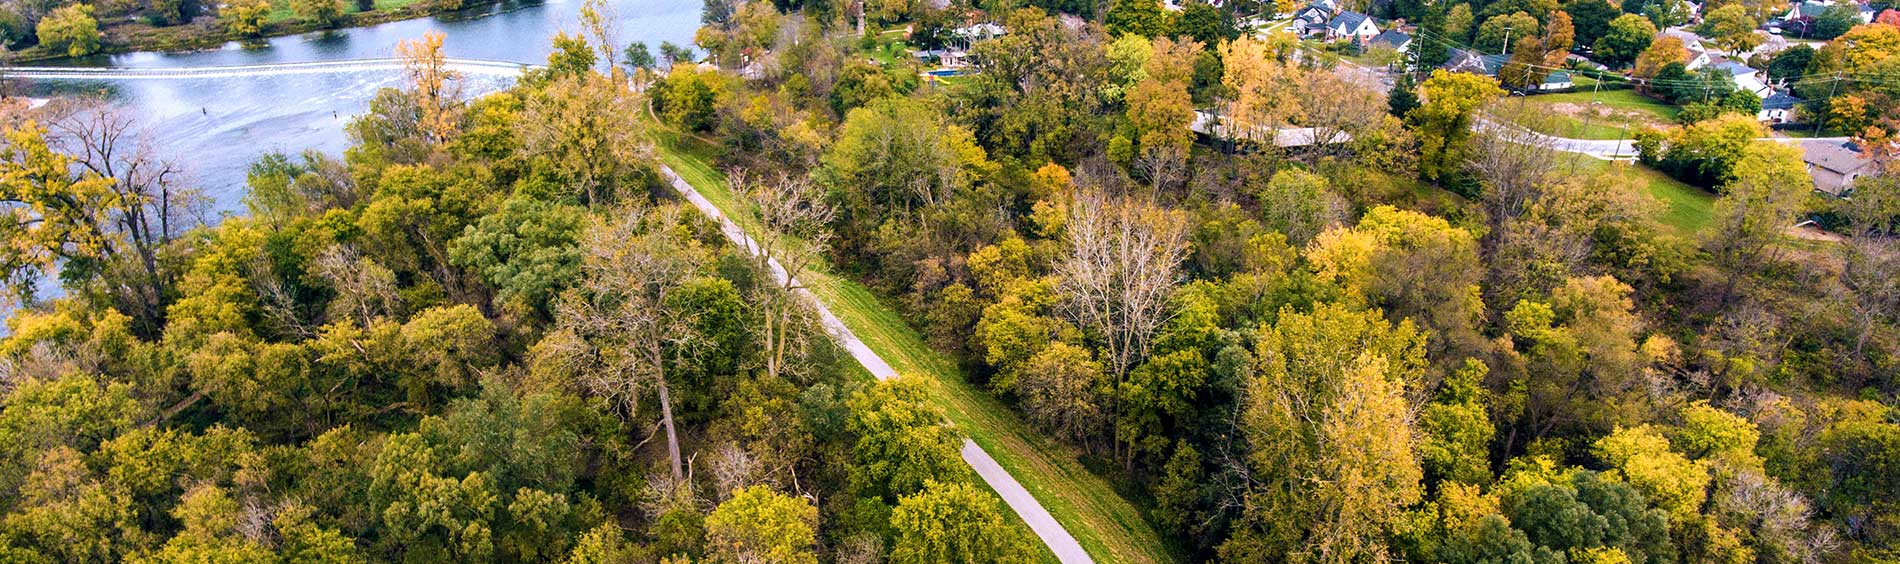 City of Brantford trail from above